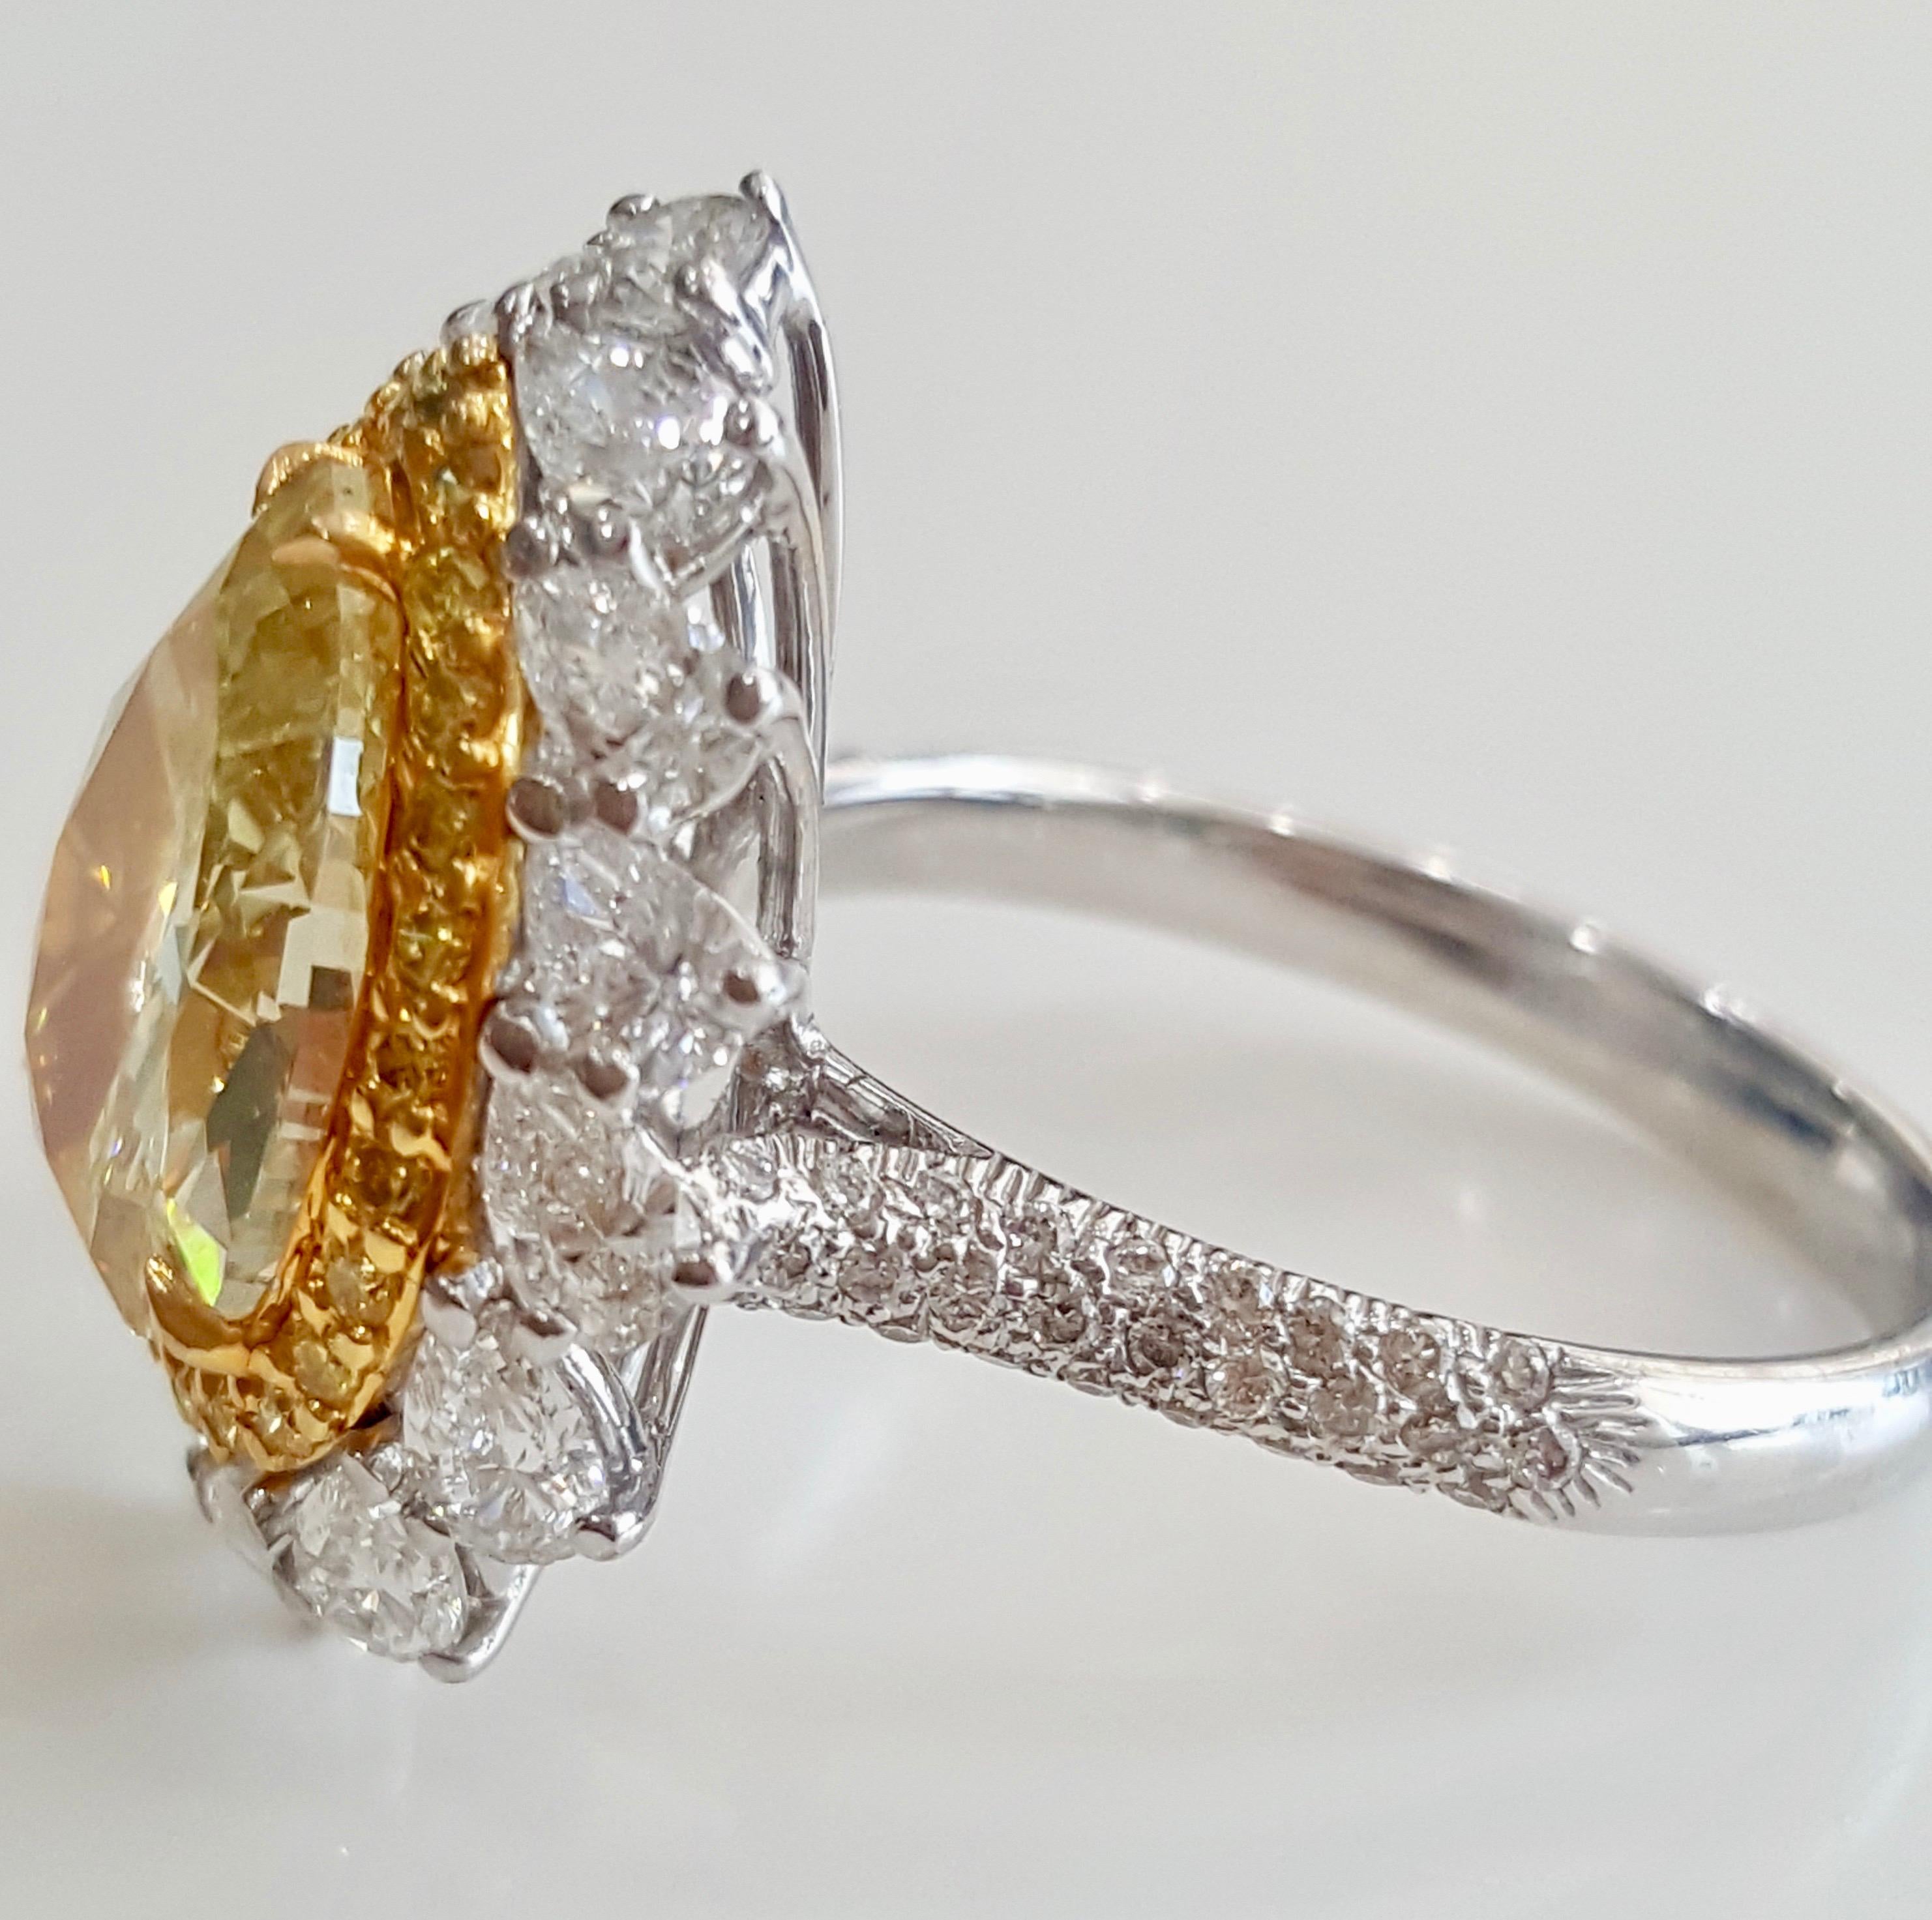 Pear Cut GIA Certified 4.64 Carat Natural Fancy Yellow And White Diamond Ring In 18 K 